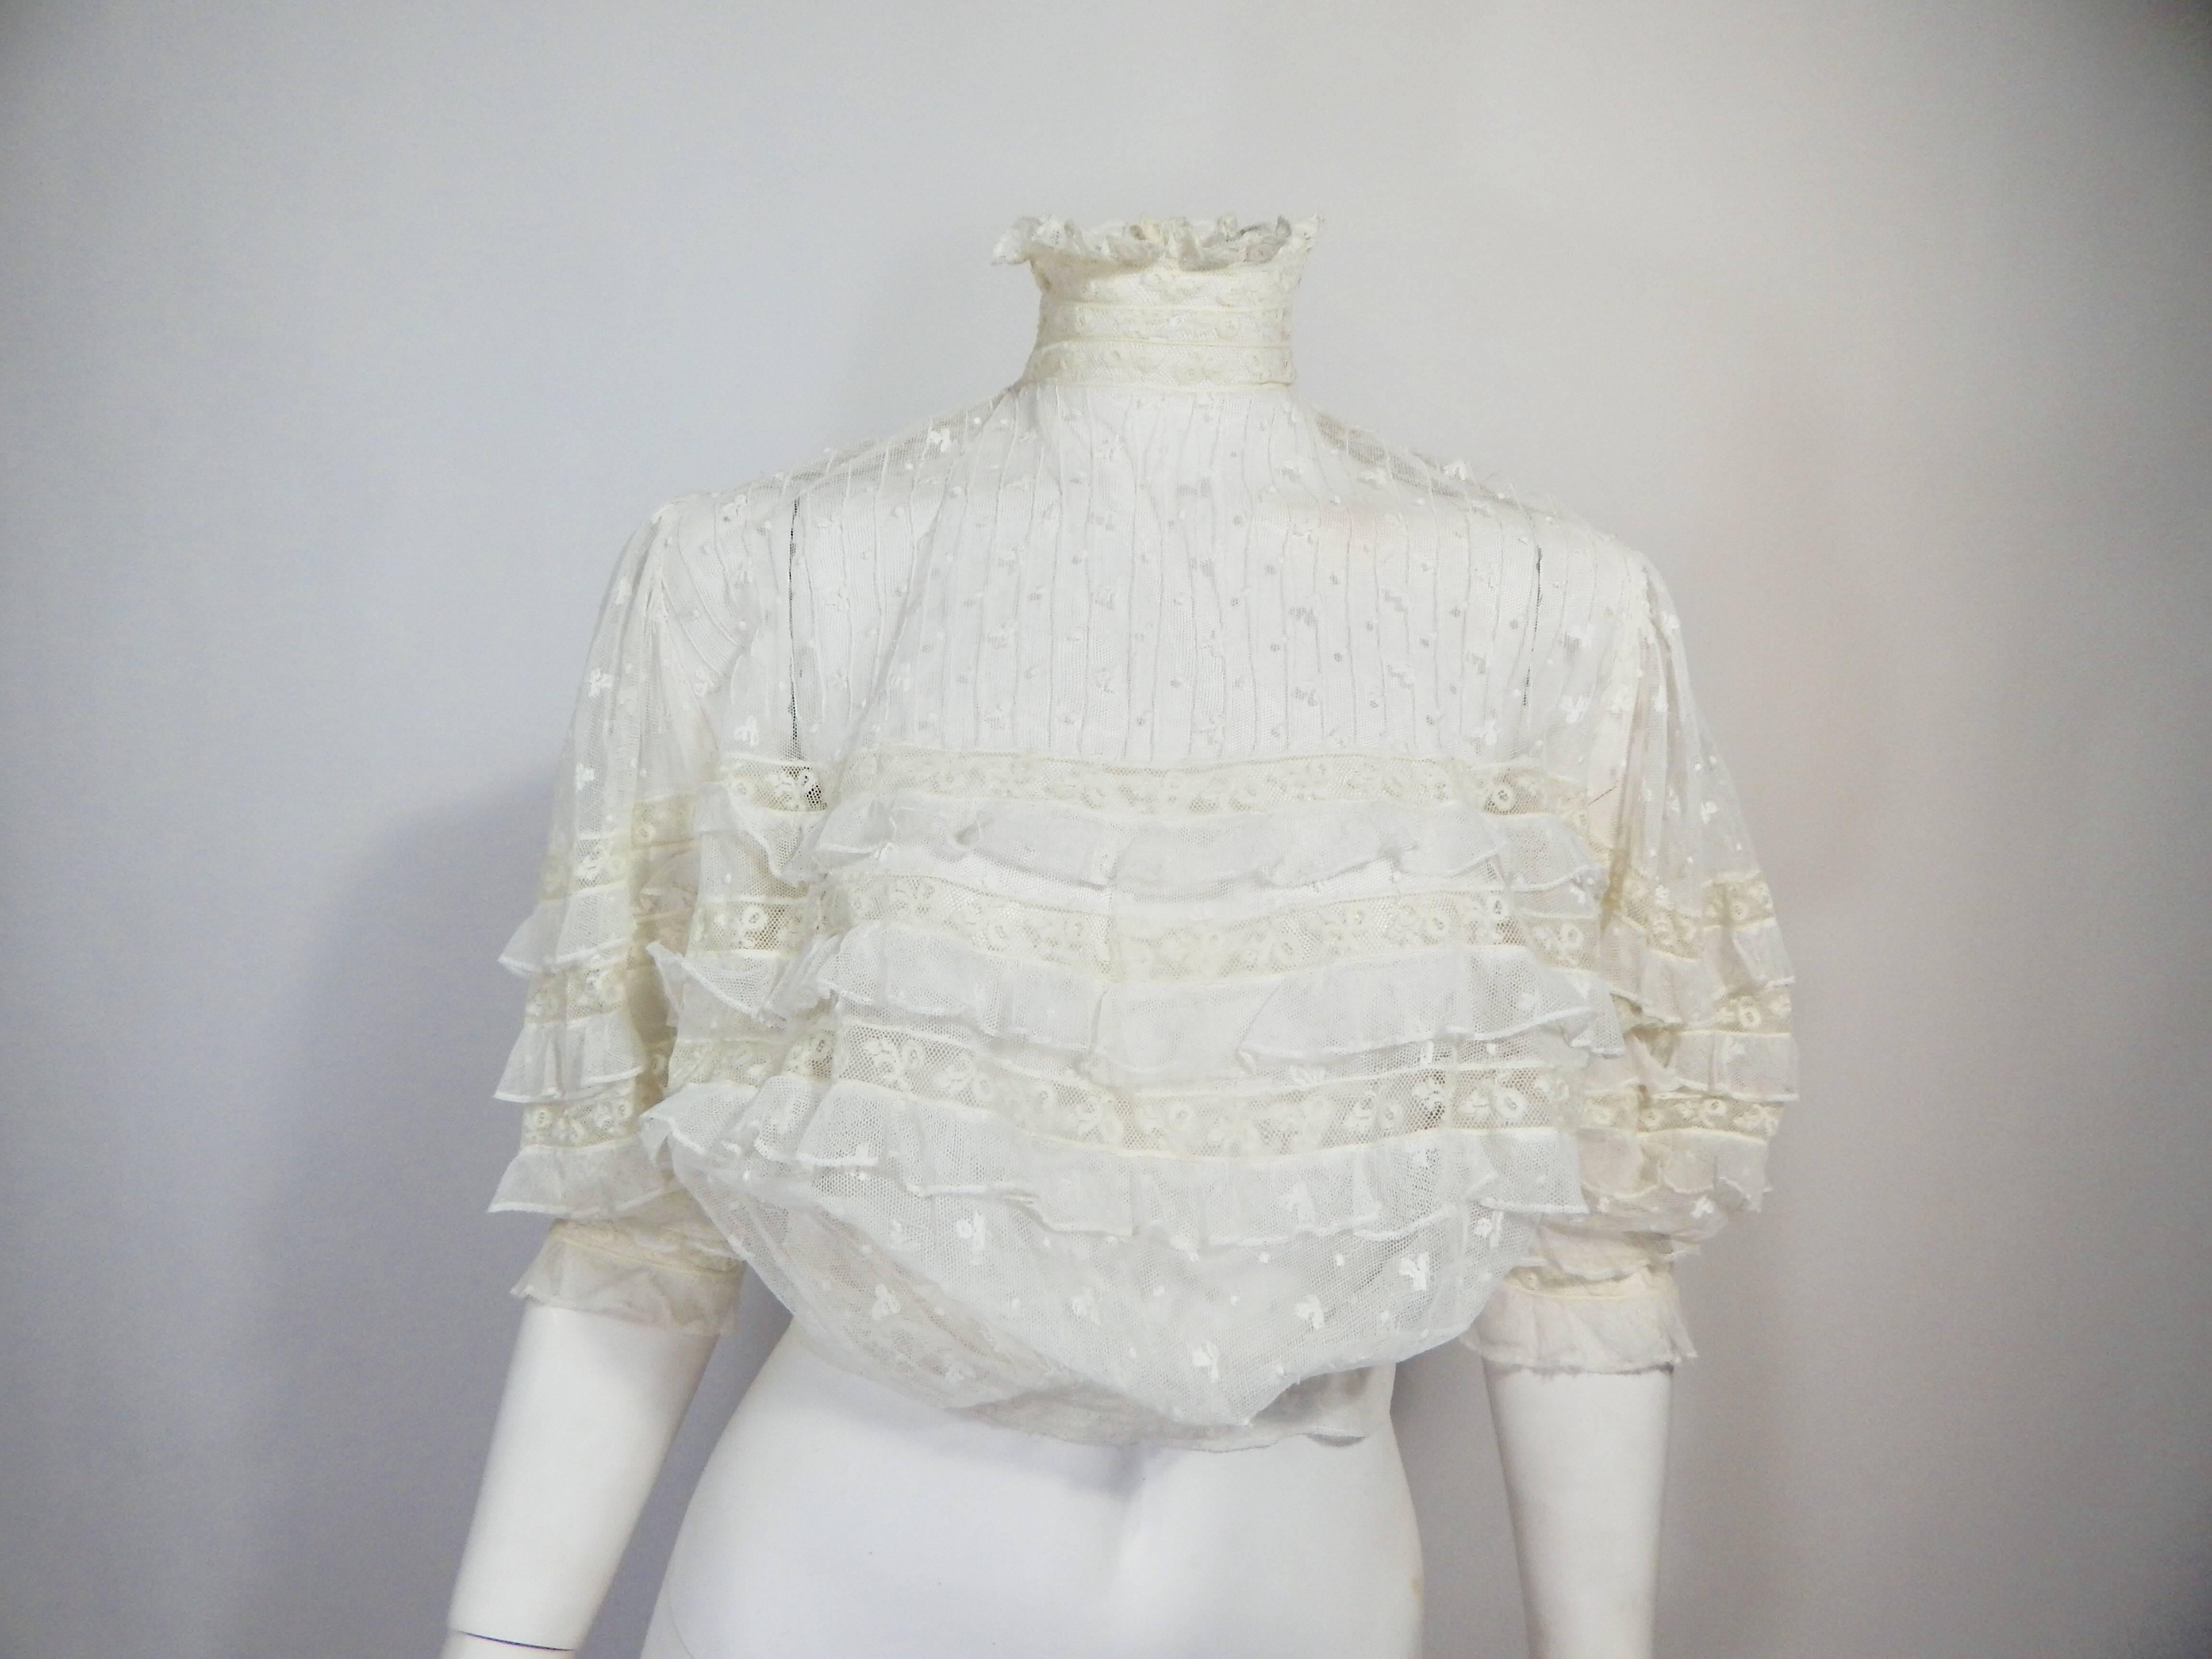 Antique Vintage 1900s Edwardian Sheer Embroidered Ruffled Blouse Top. Hook and eye closures up back. Approximate modern day Small or Size 2. Excellent Condition. 